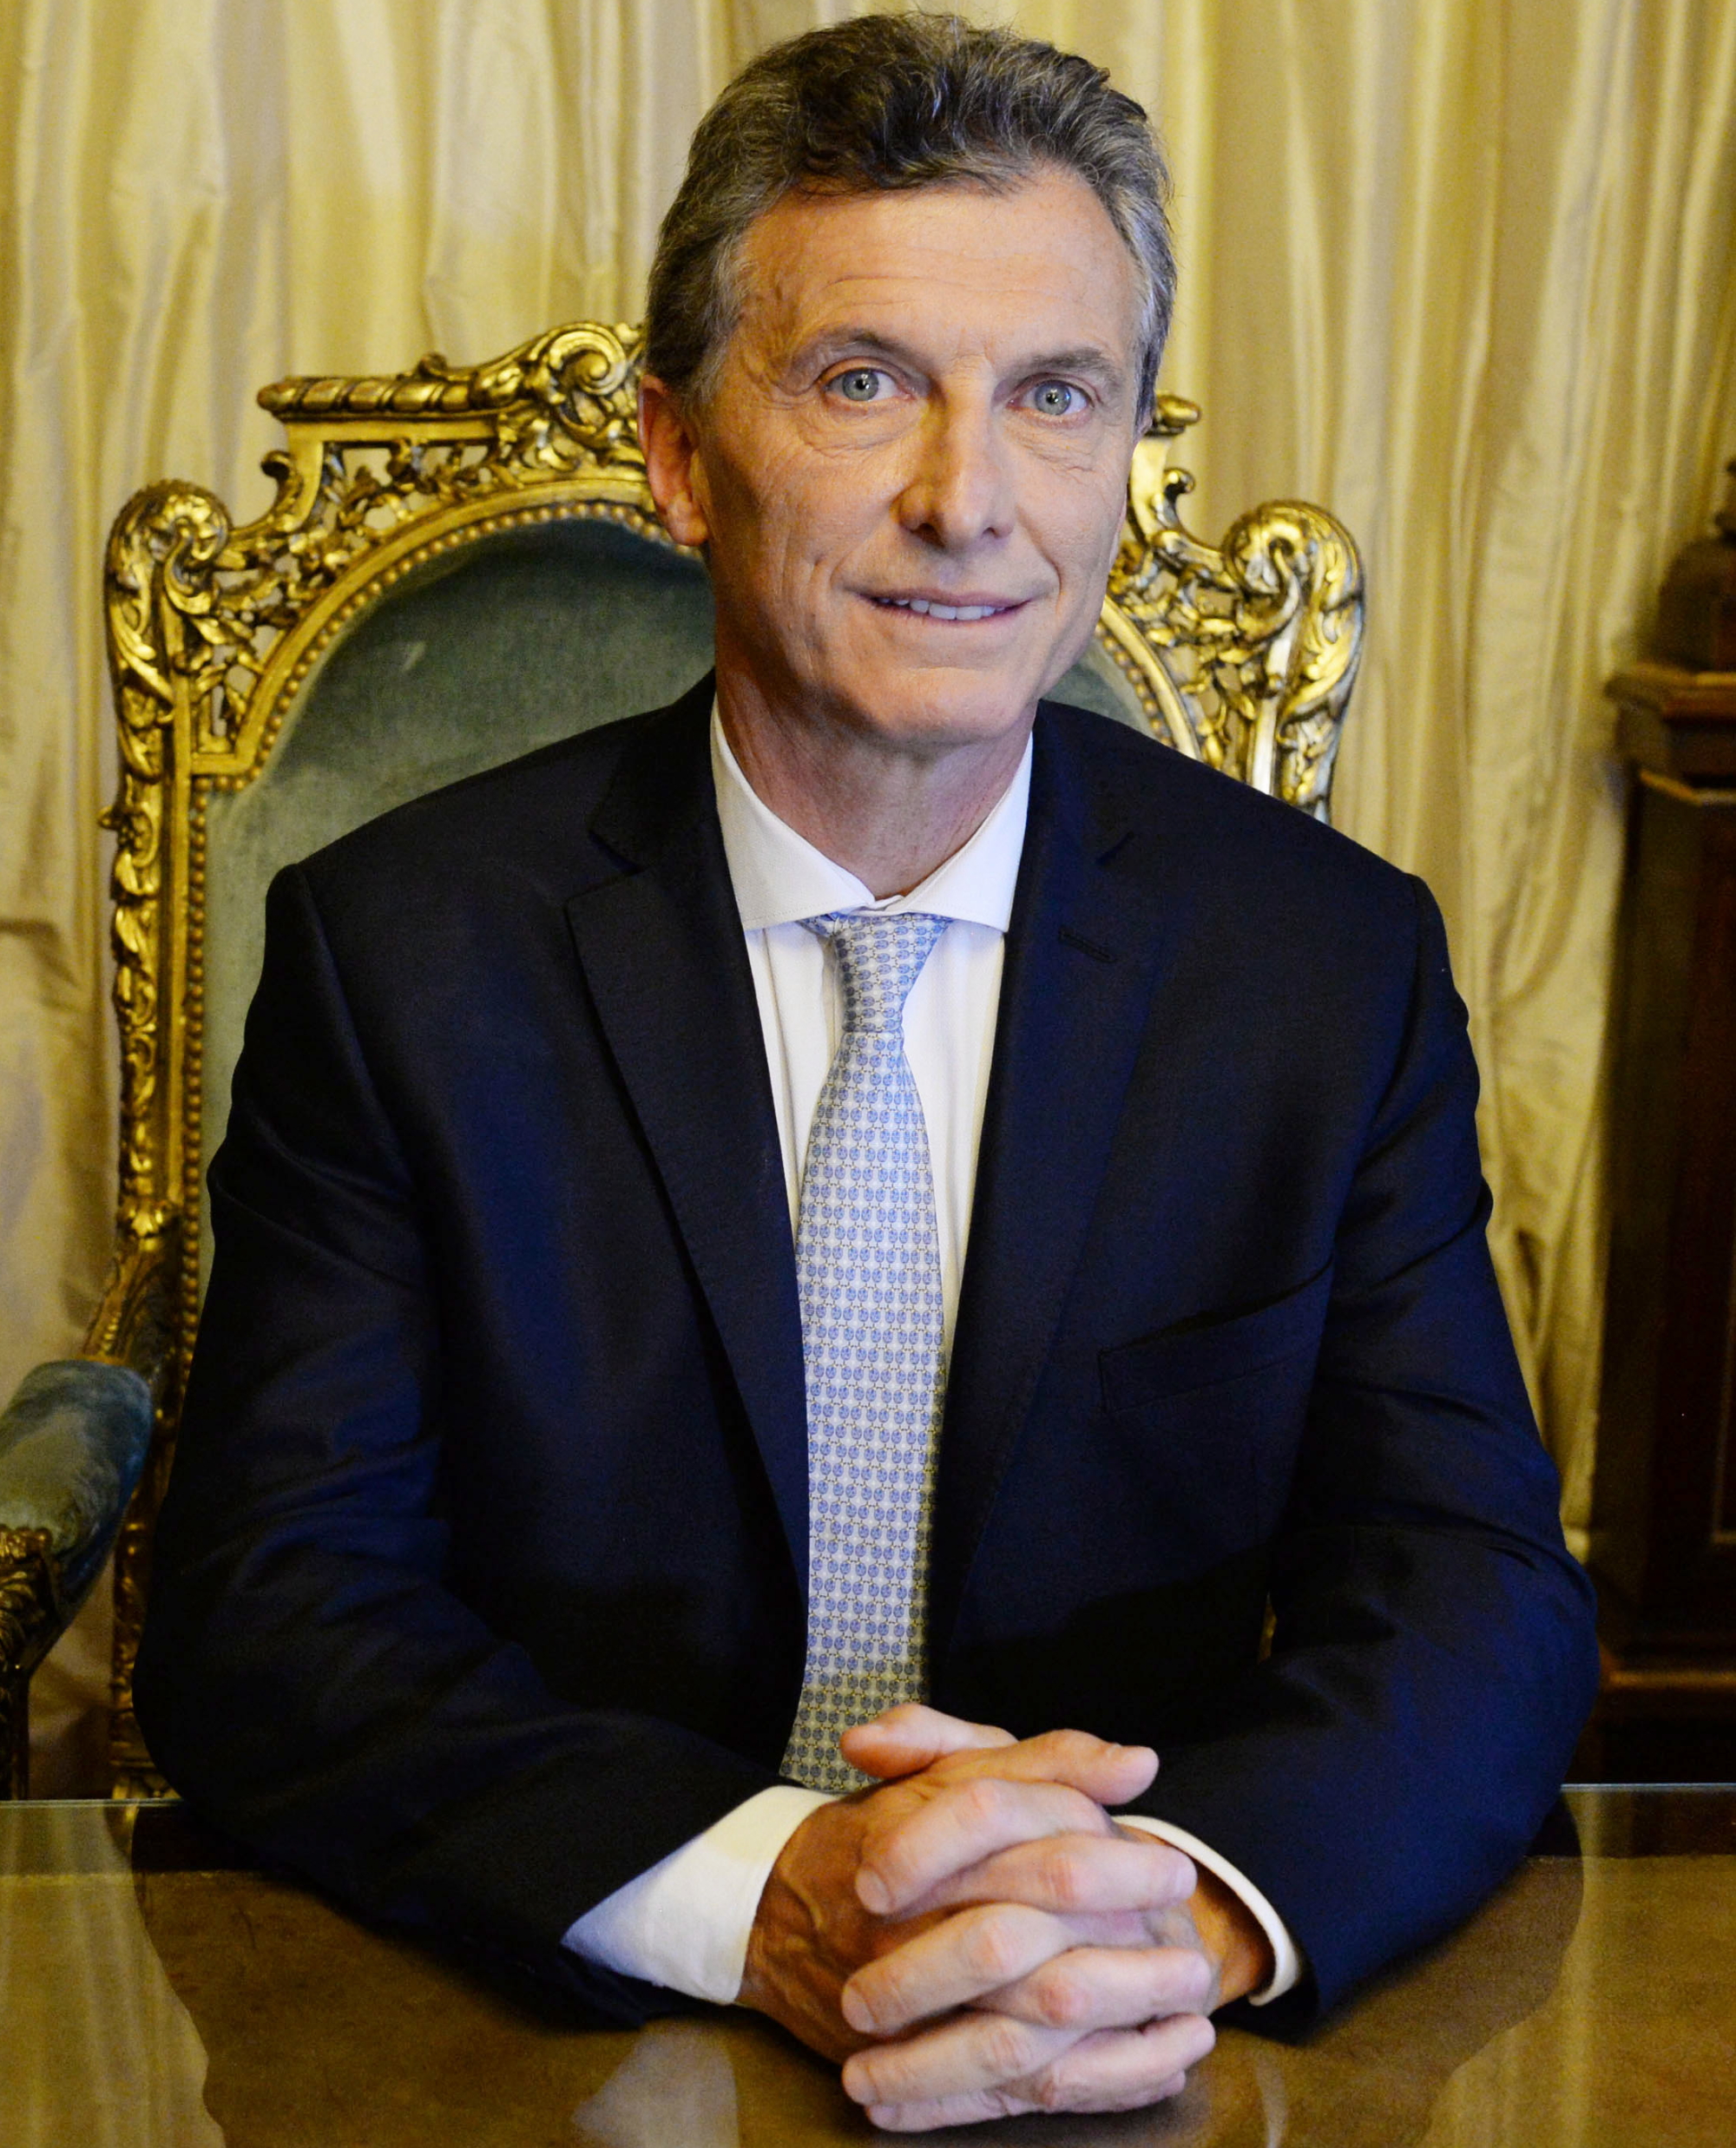 President Mauricio Macri of Argentina. Picture by Casa Rosada (Argentina Presidency of the Nation). Click to enlarge.